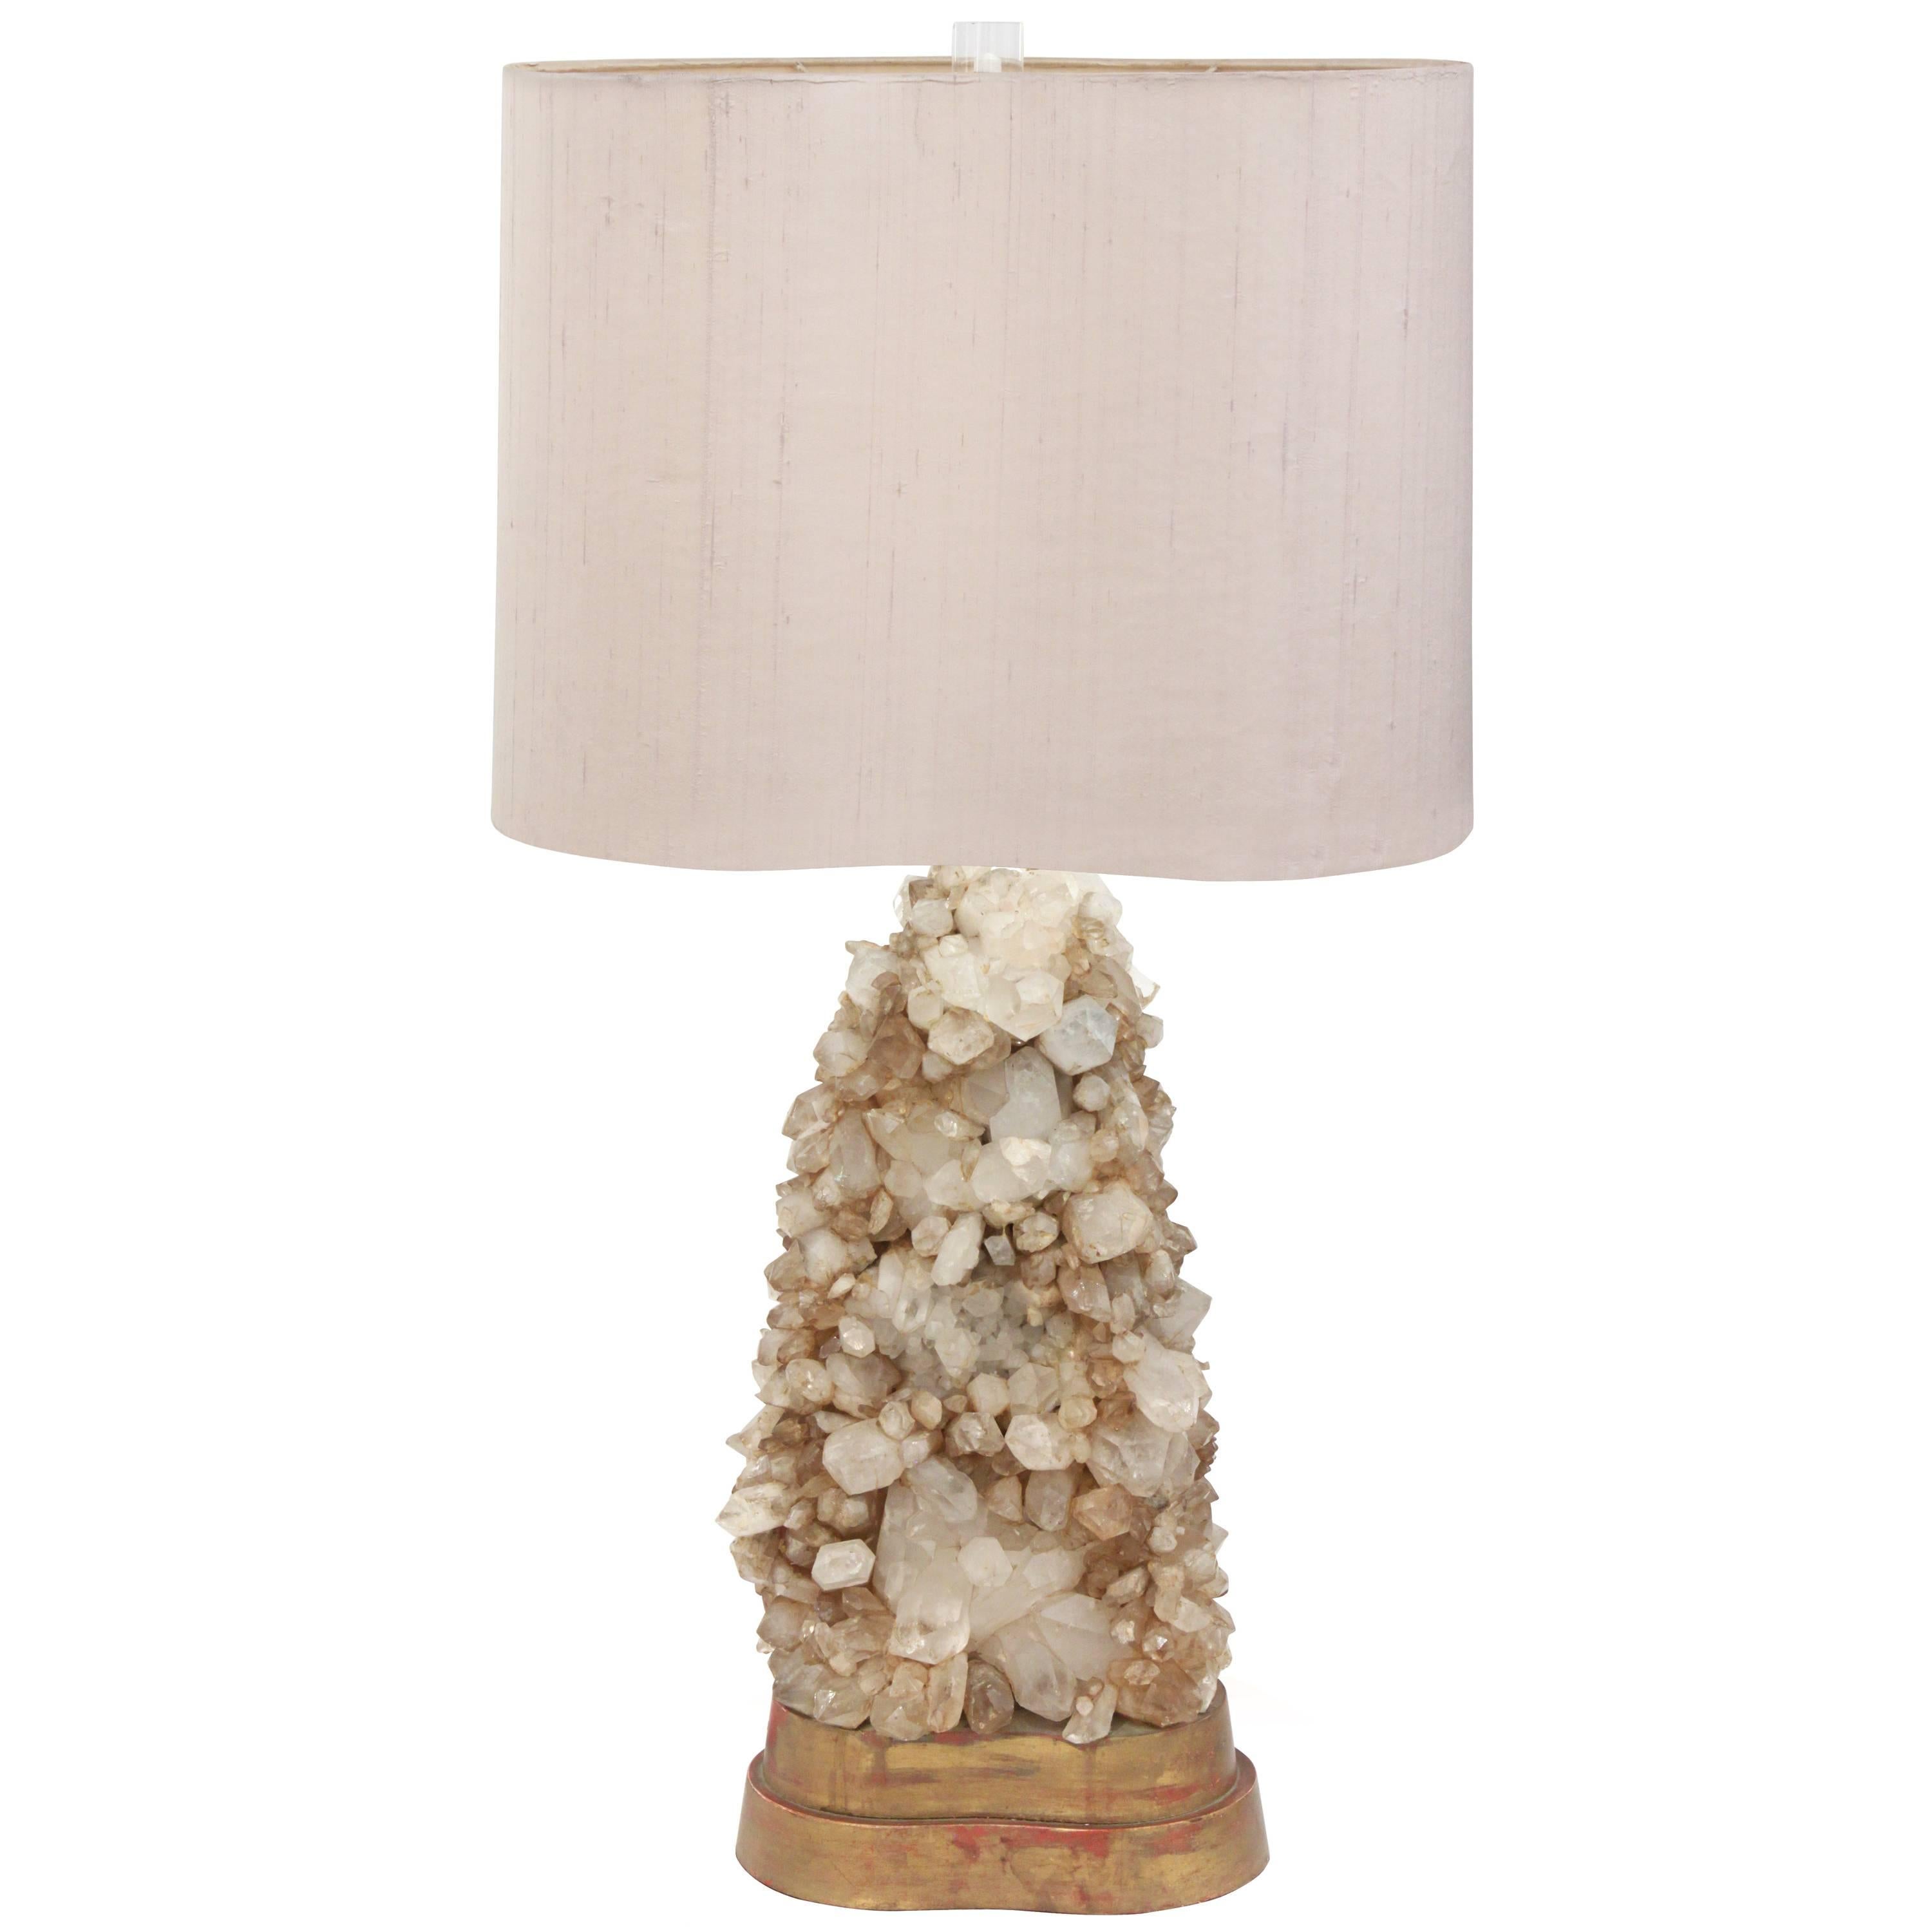 Table Lamp with Quartz Crystals by Carole Stupell﻿